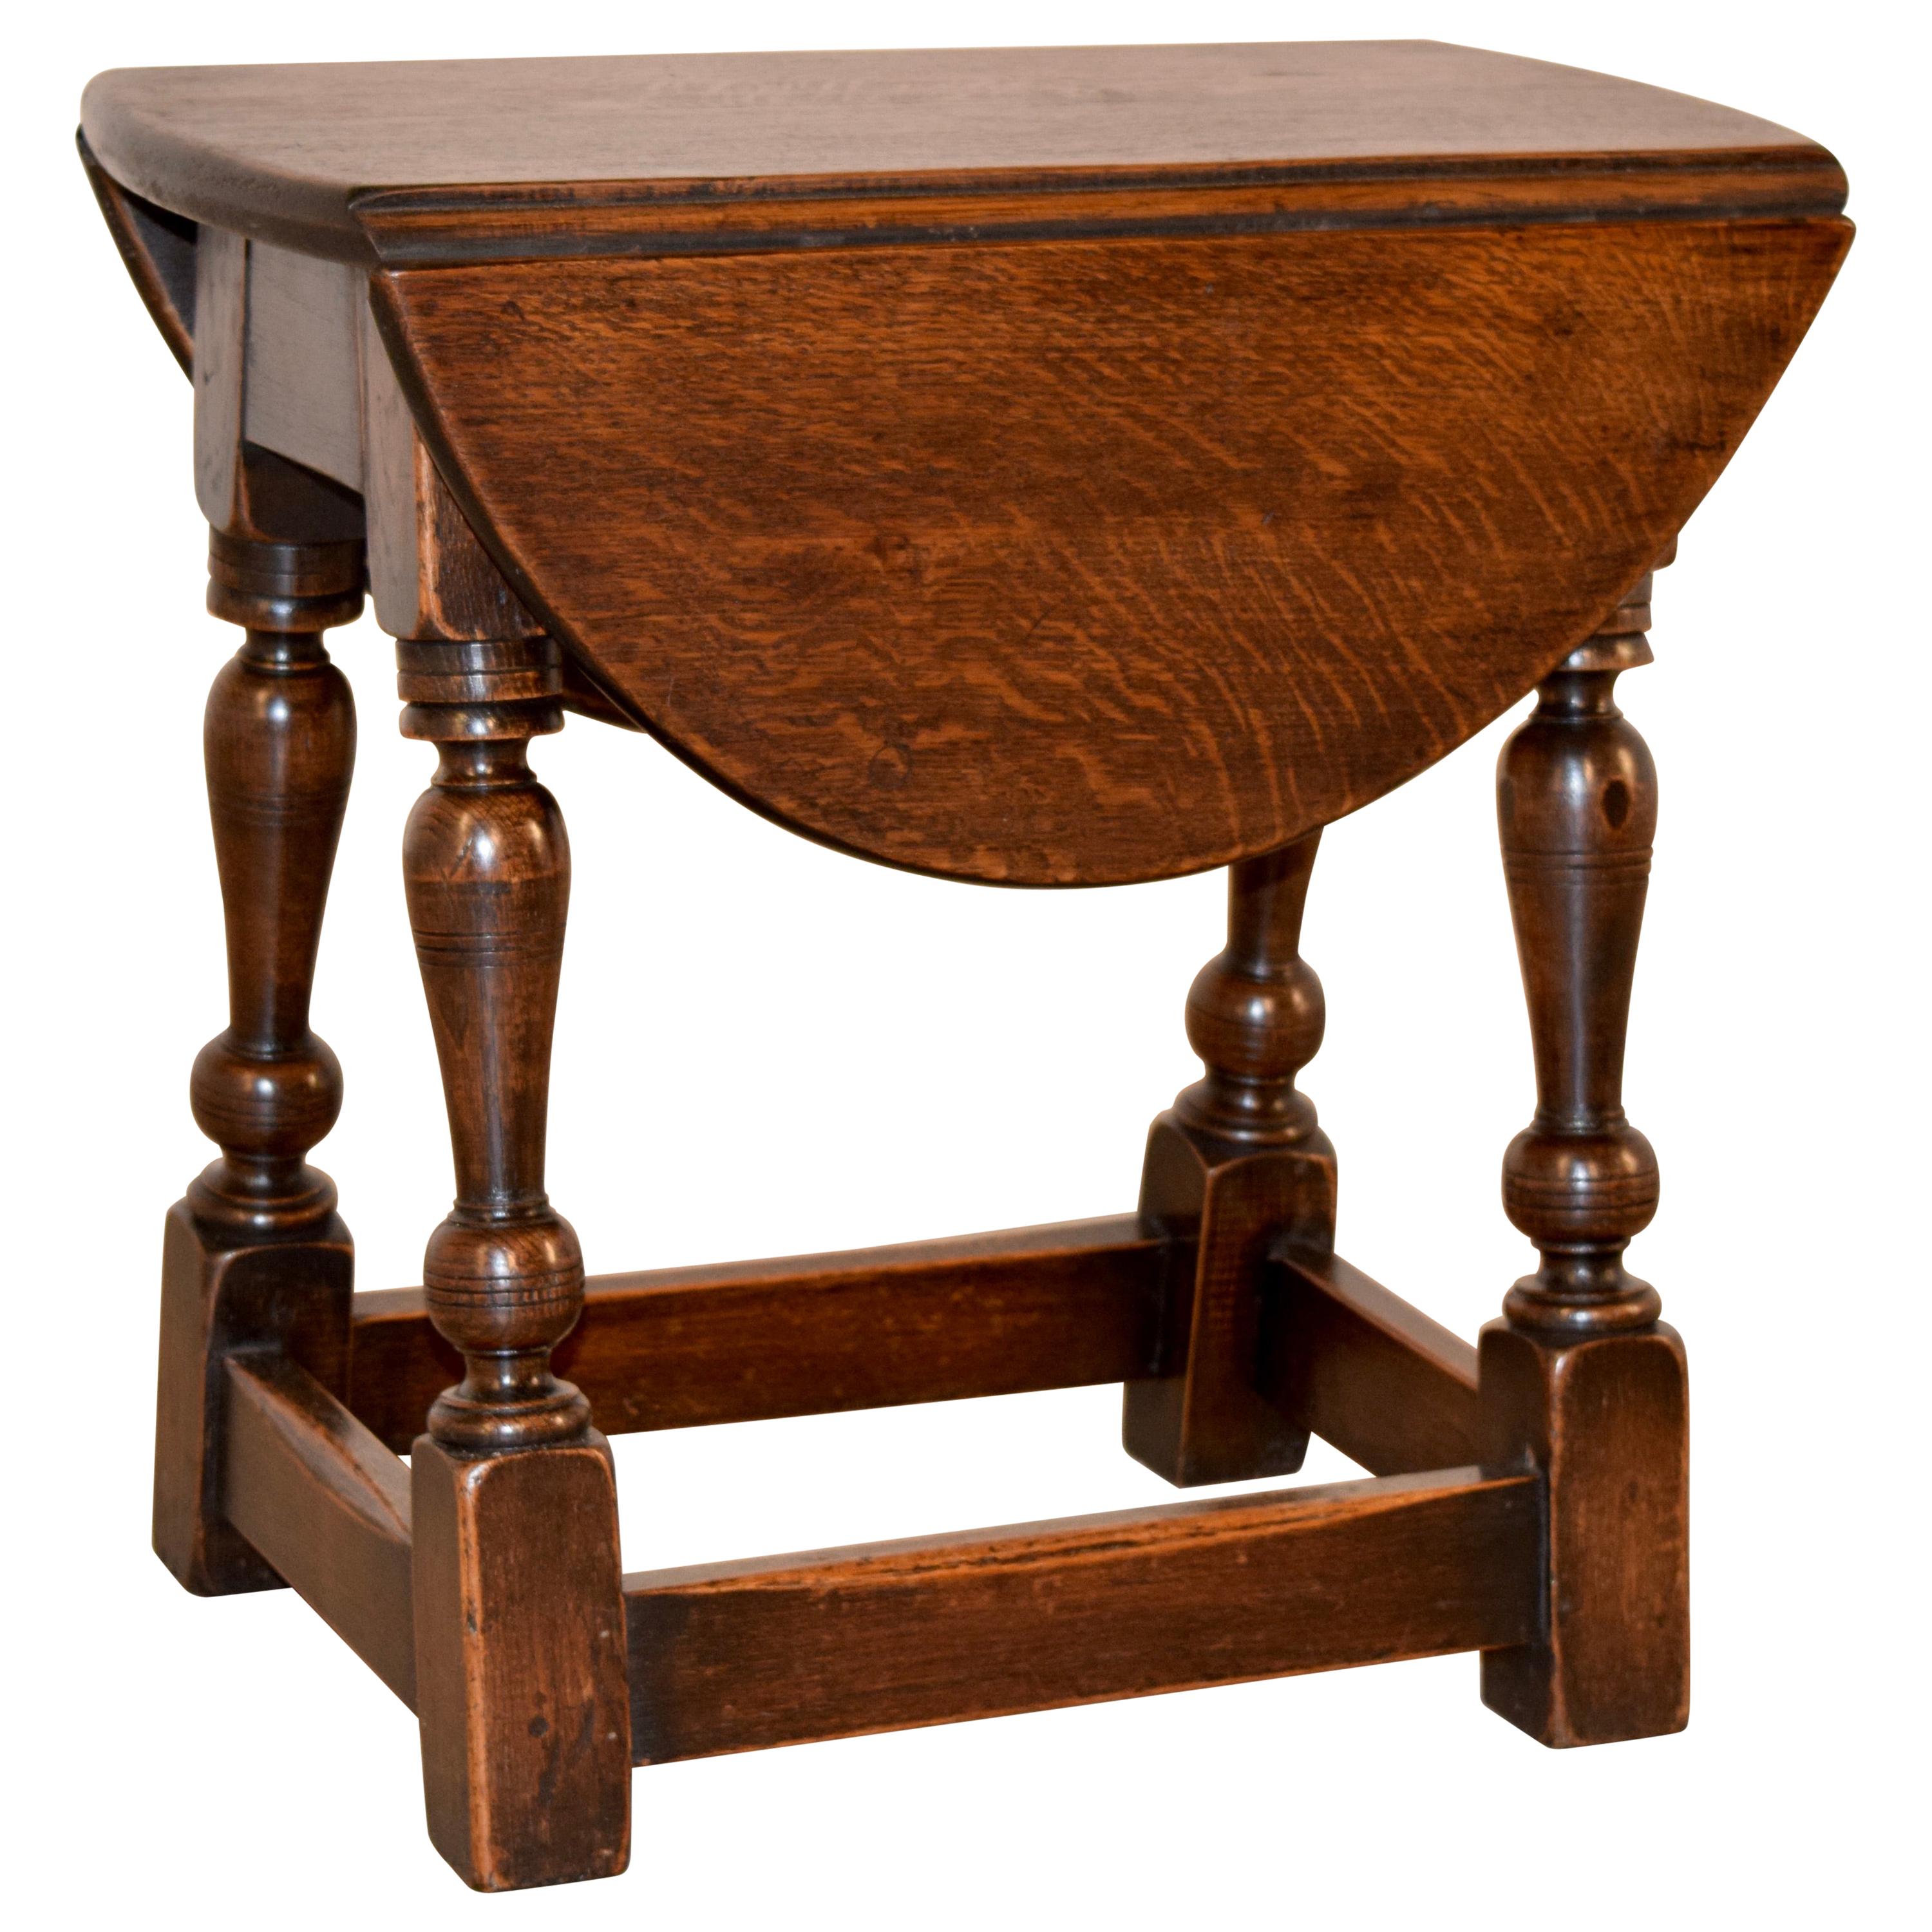 19th Century Small Drop-Leaf Table